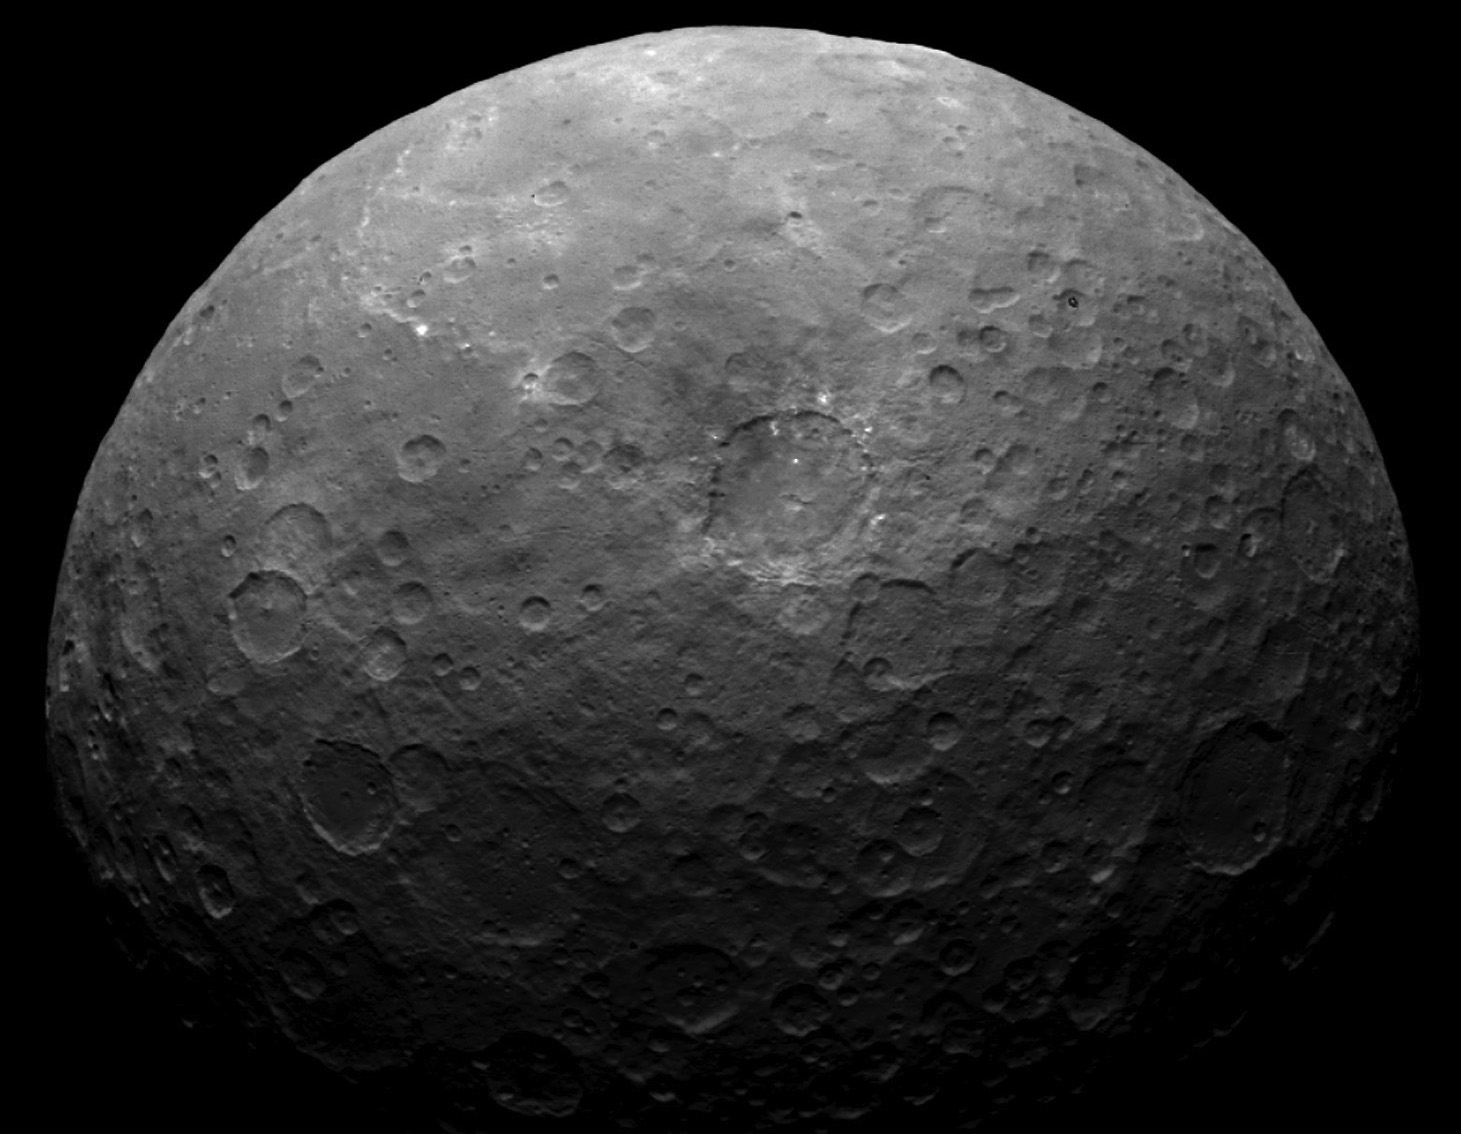 There are numerous bright spots on Ceres, but none are as prominent as the ones in Occator crater, where the haze was detected. Photo Credit: NASA/JPL-Caltech/UCLA/MPS/DLR/IDA